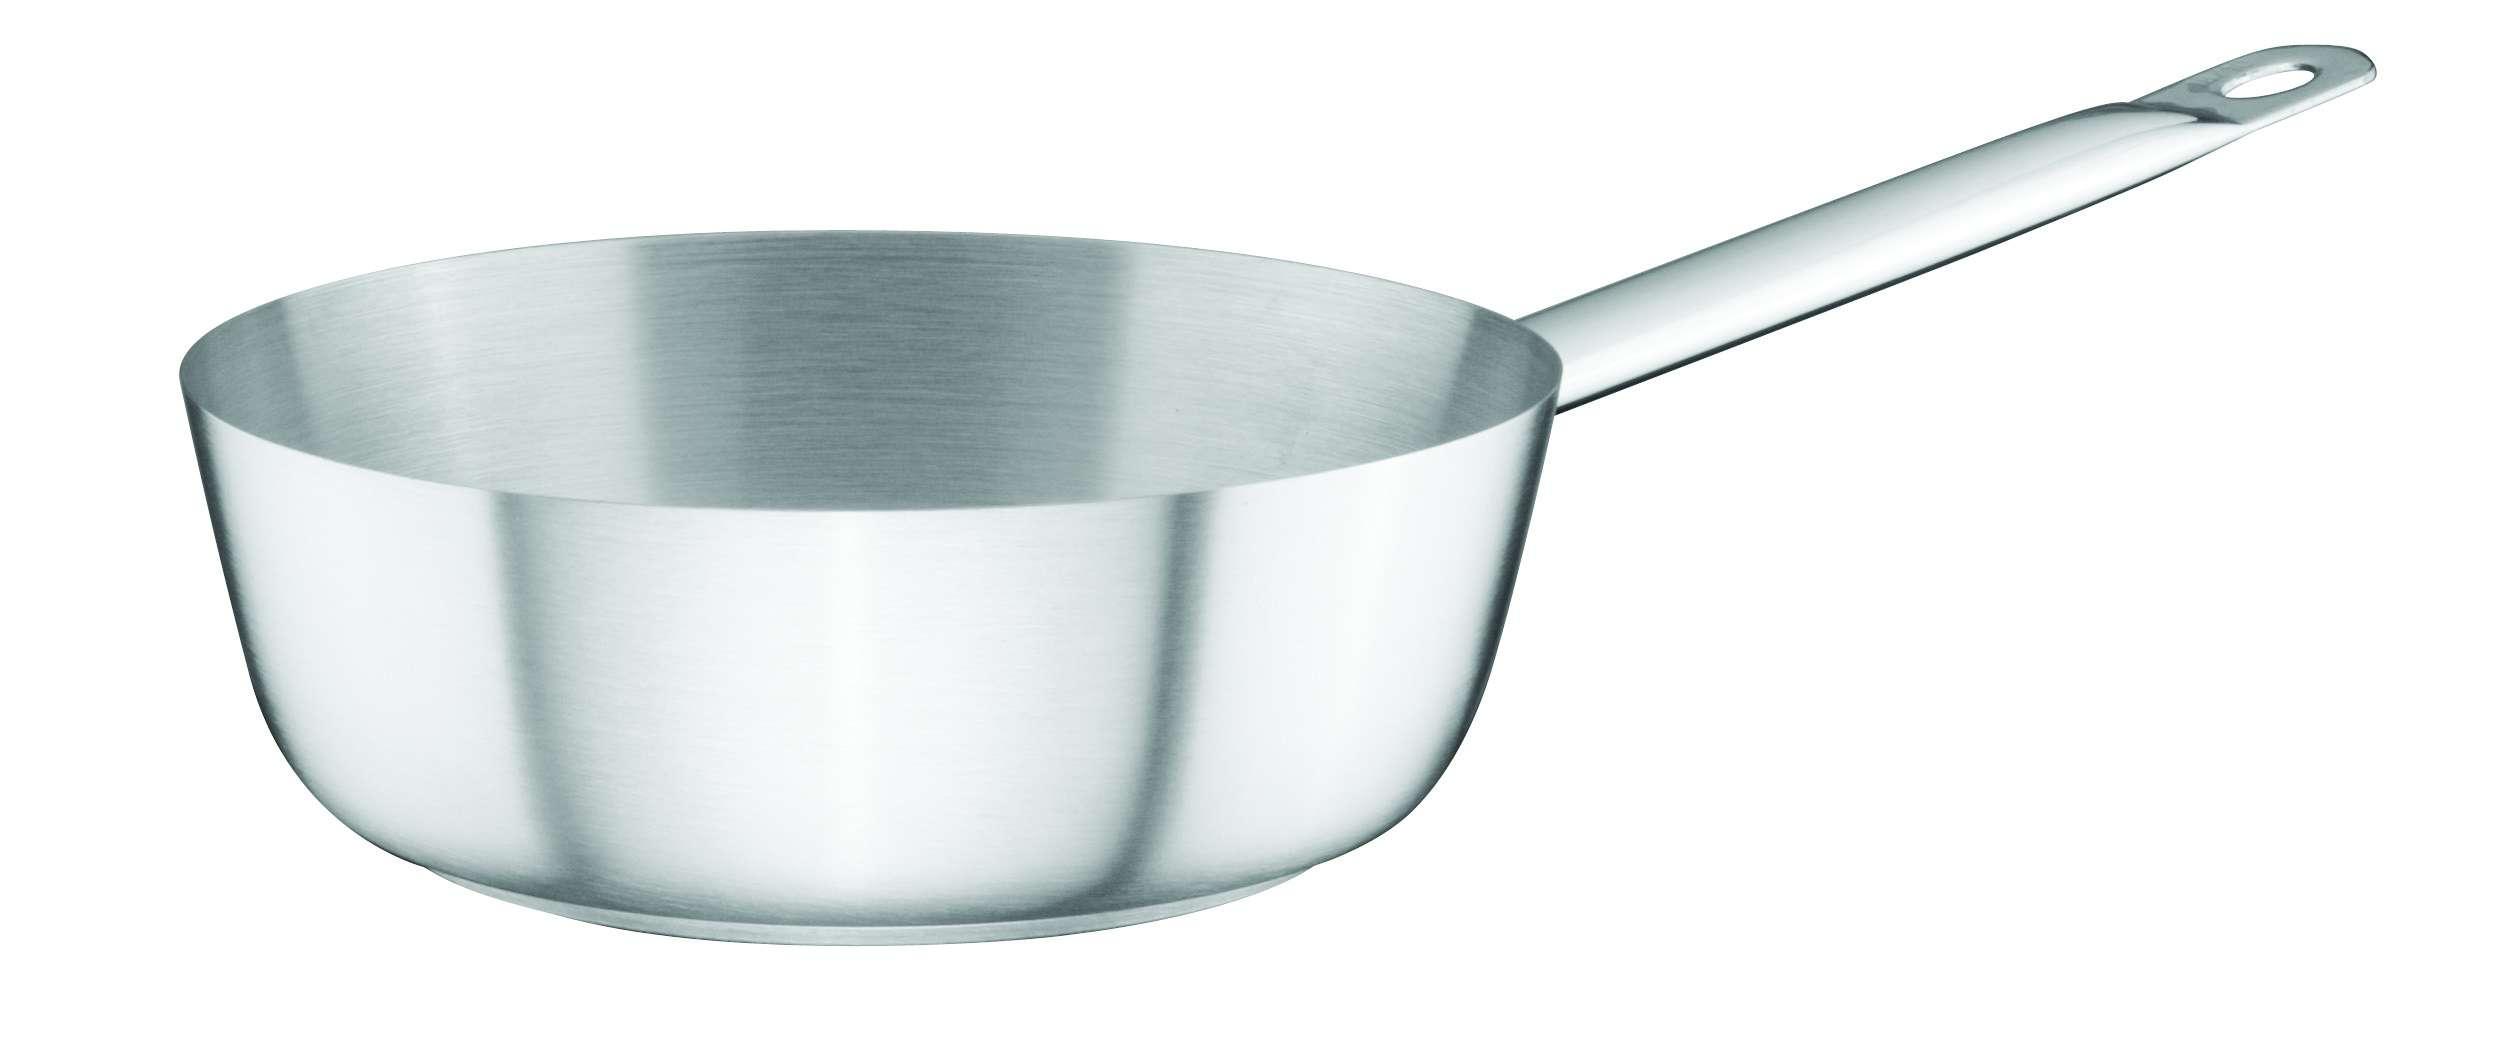 Ozti Stainless Steel Sauteuse 18 cm x 6 cm Silver Stainless Steel